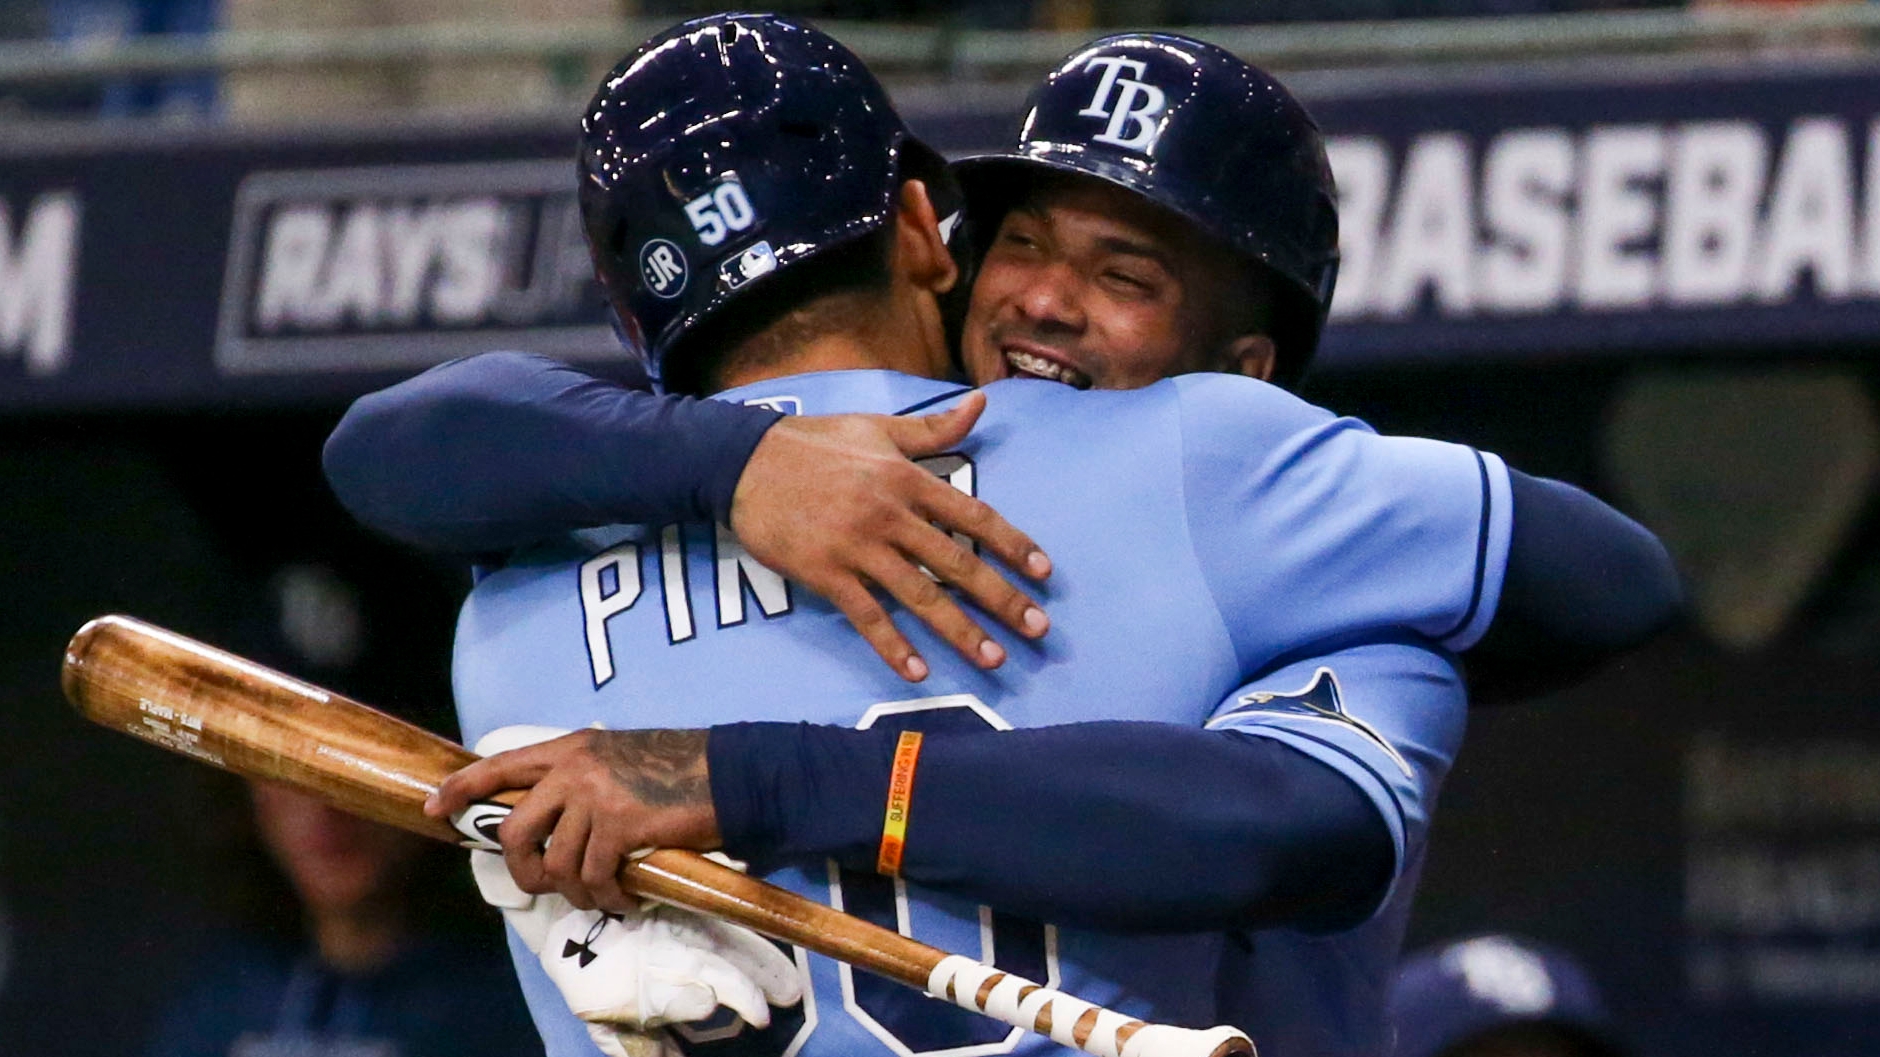 And it's gone! Tampa Bay Rays highest leverage homeruns of the